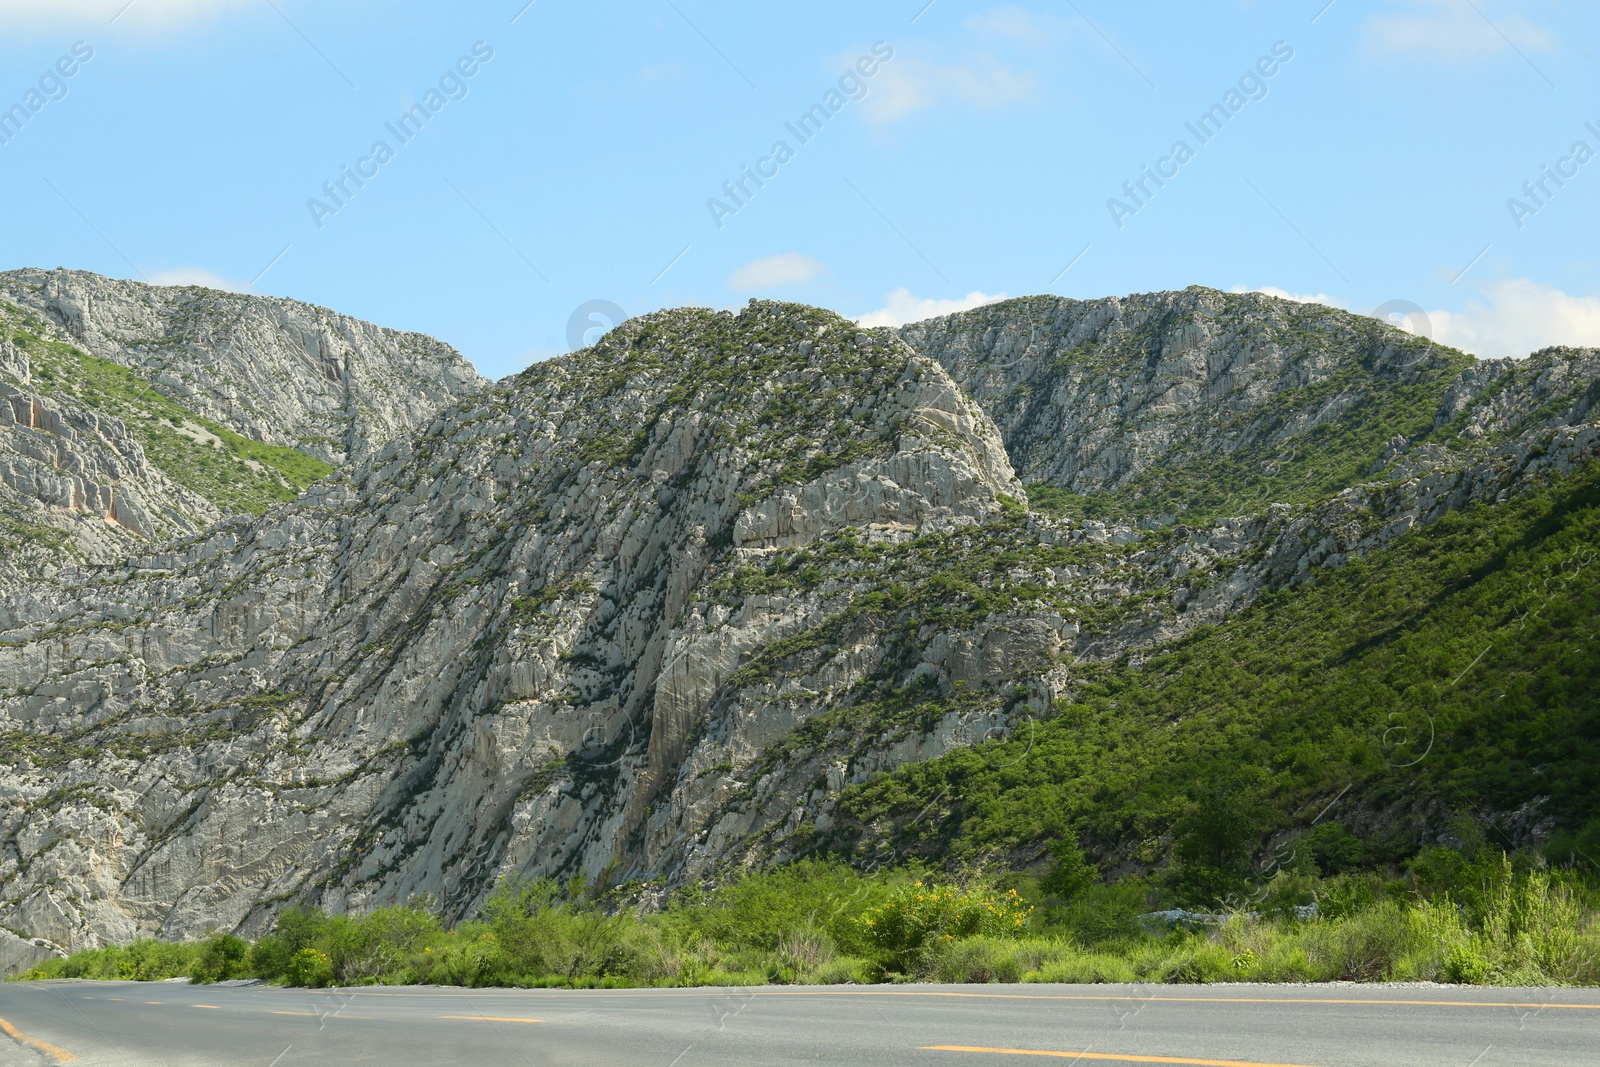 Photo of Picturesque view of beautiful mountains and plants near road